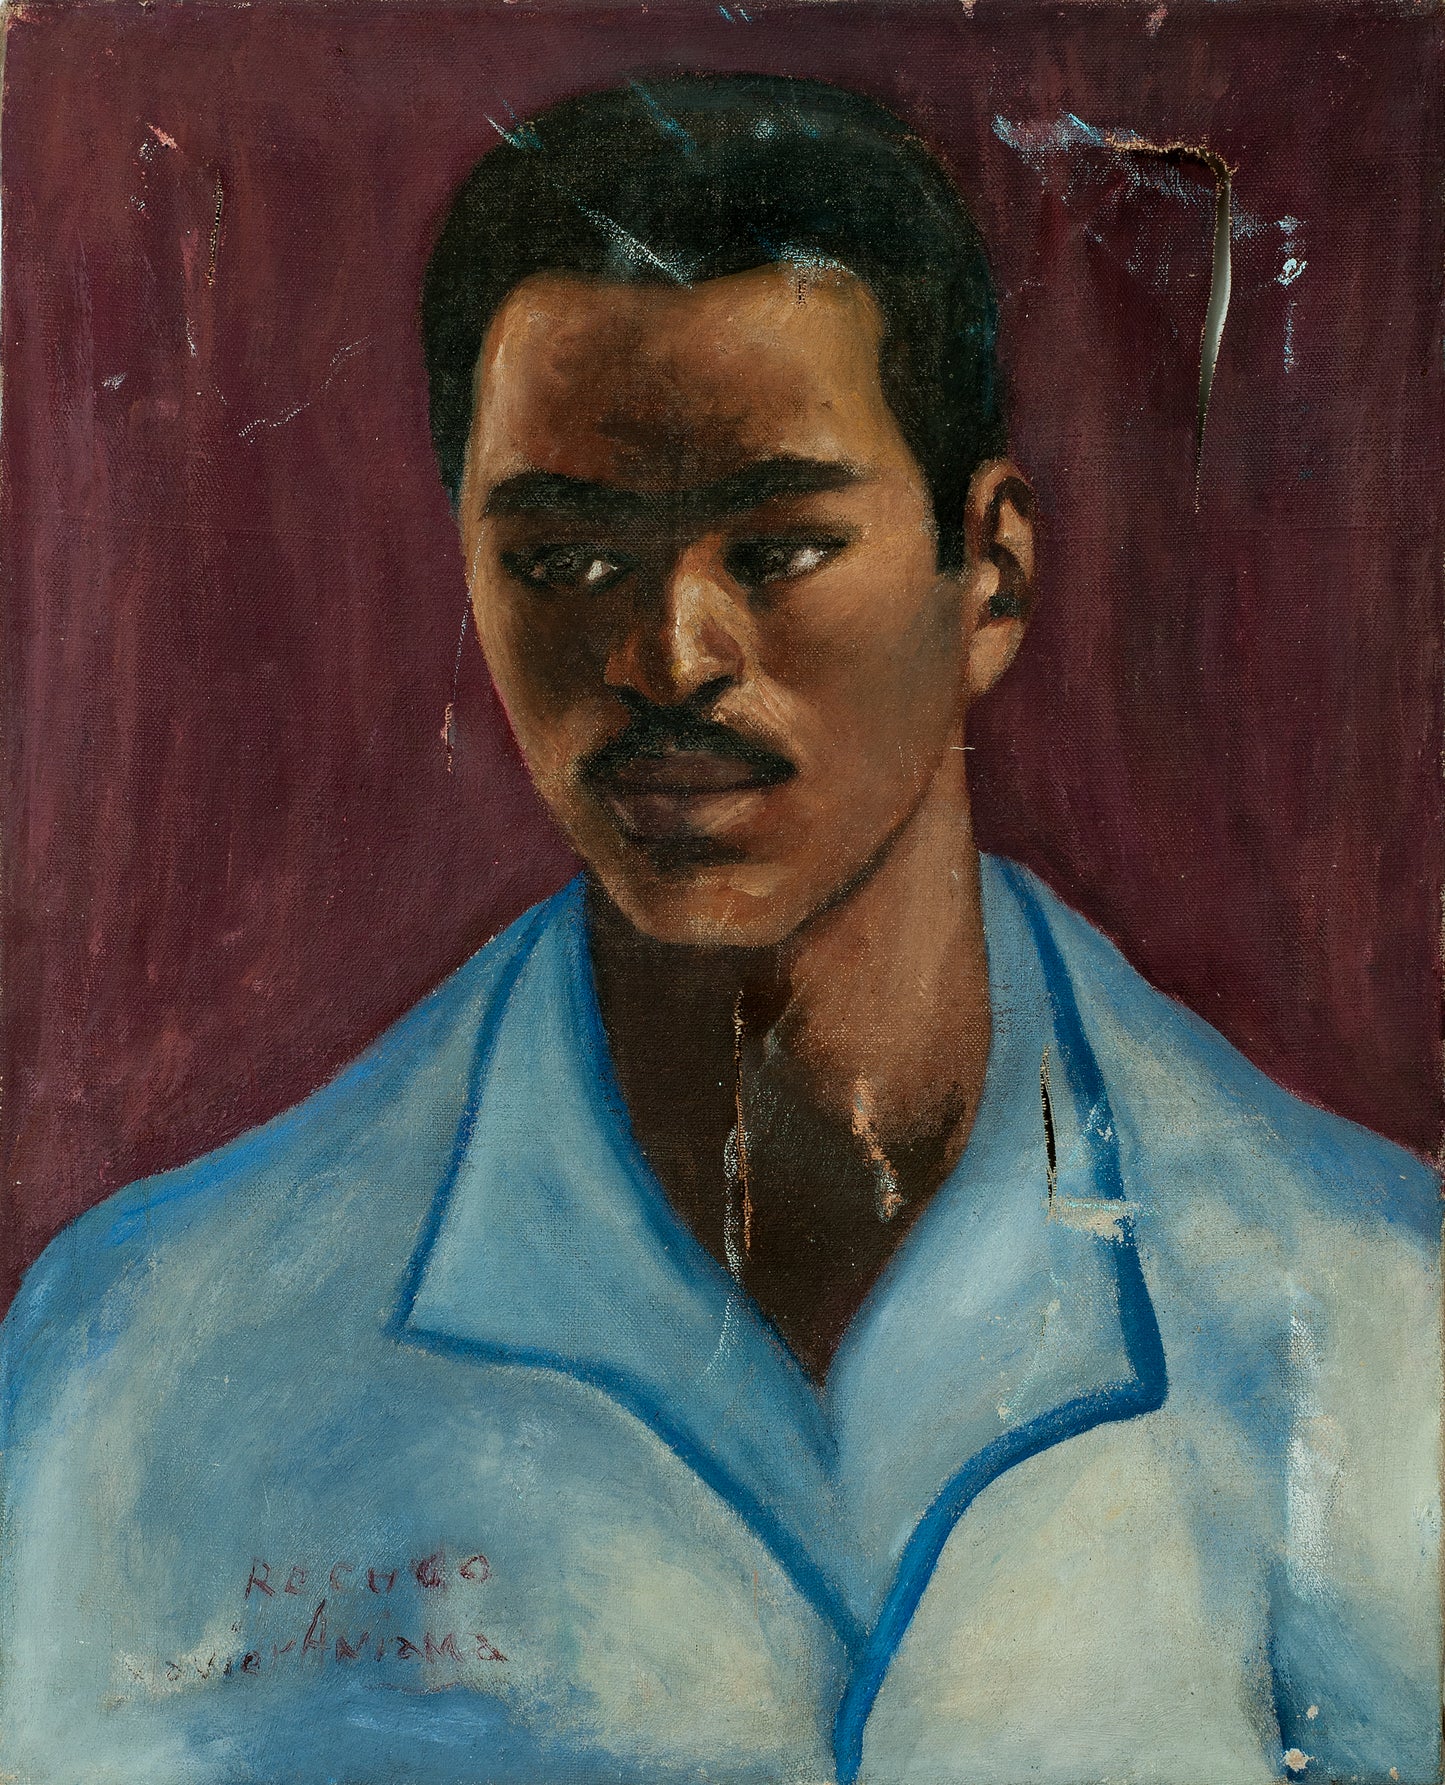 Xavier Amiama 20"x16" Man's Portrait Oil On Canvas Painting #9-3-96GSN-Fondation Marie & Georges S. Nader